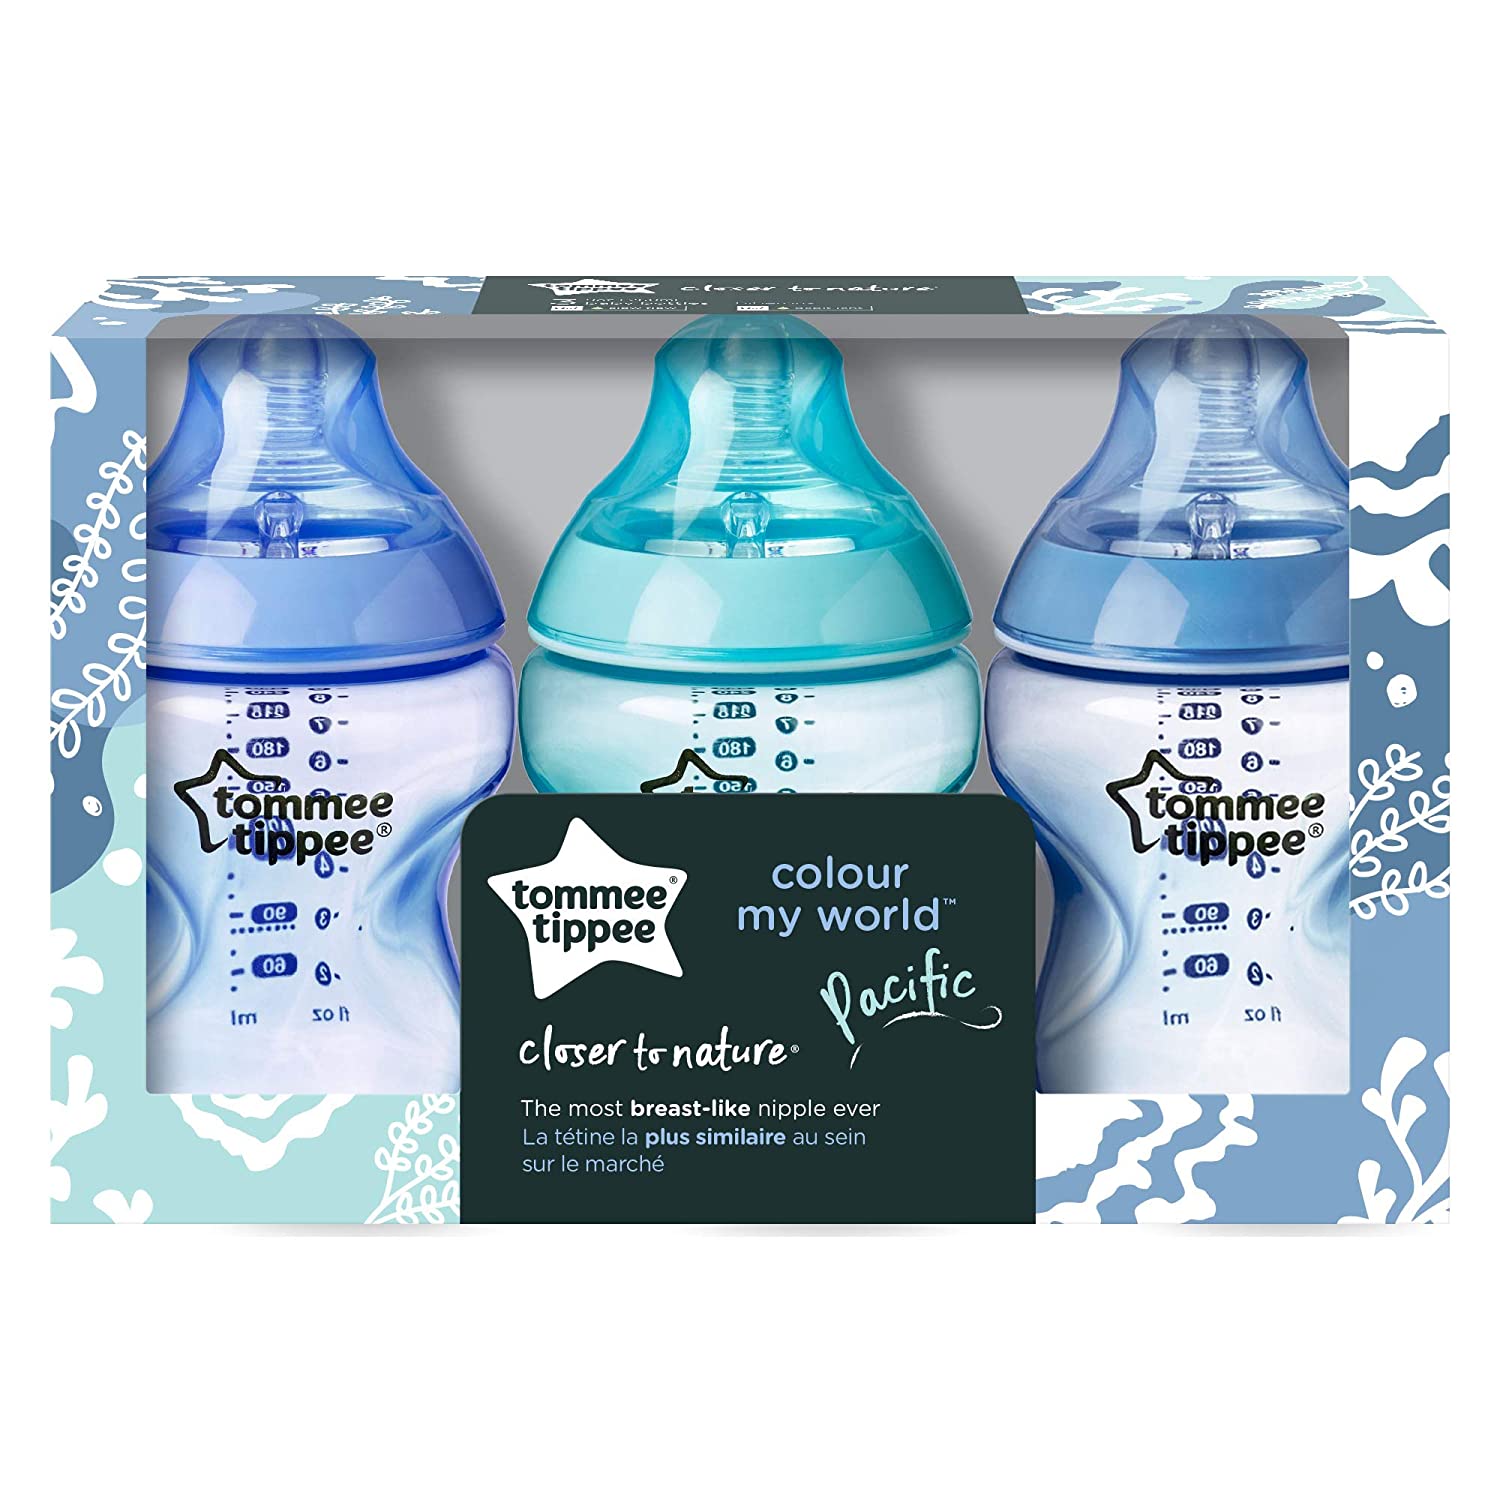 Tommee Tippee Closer To Nature 9oz - 3pk